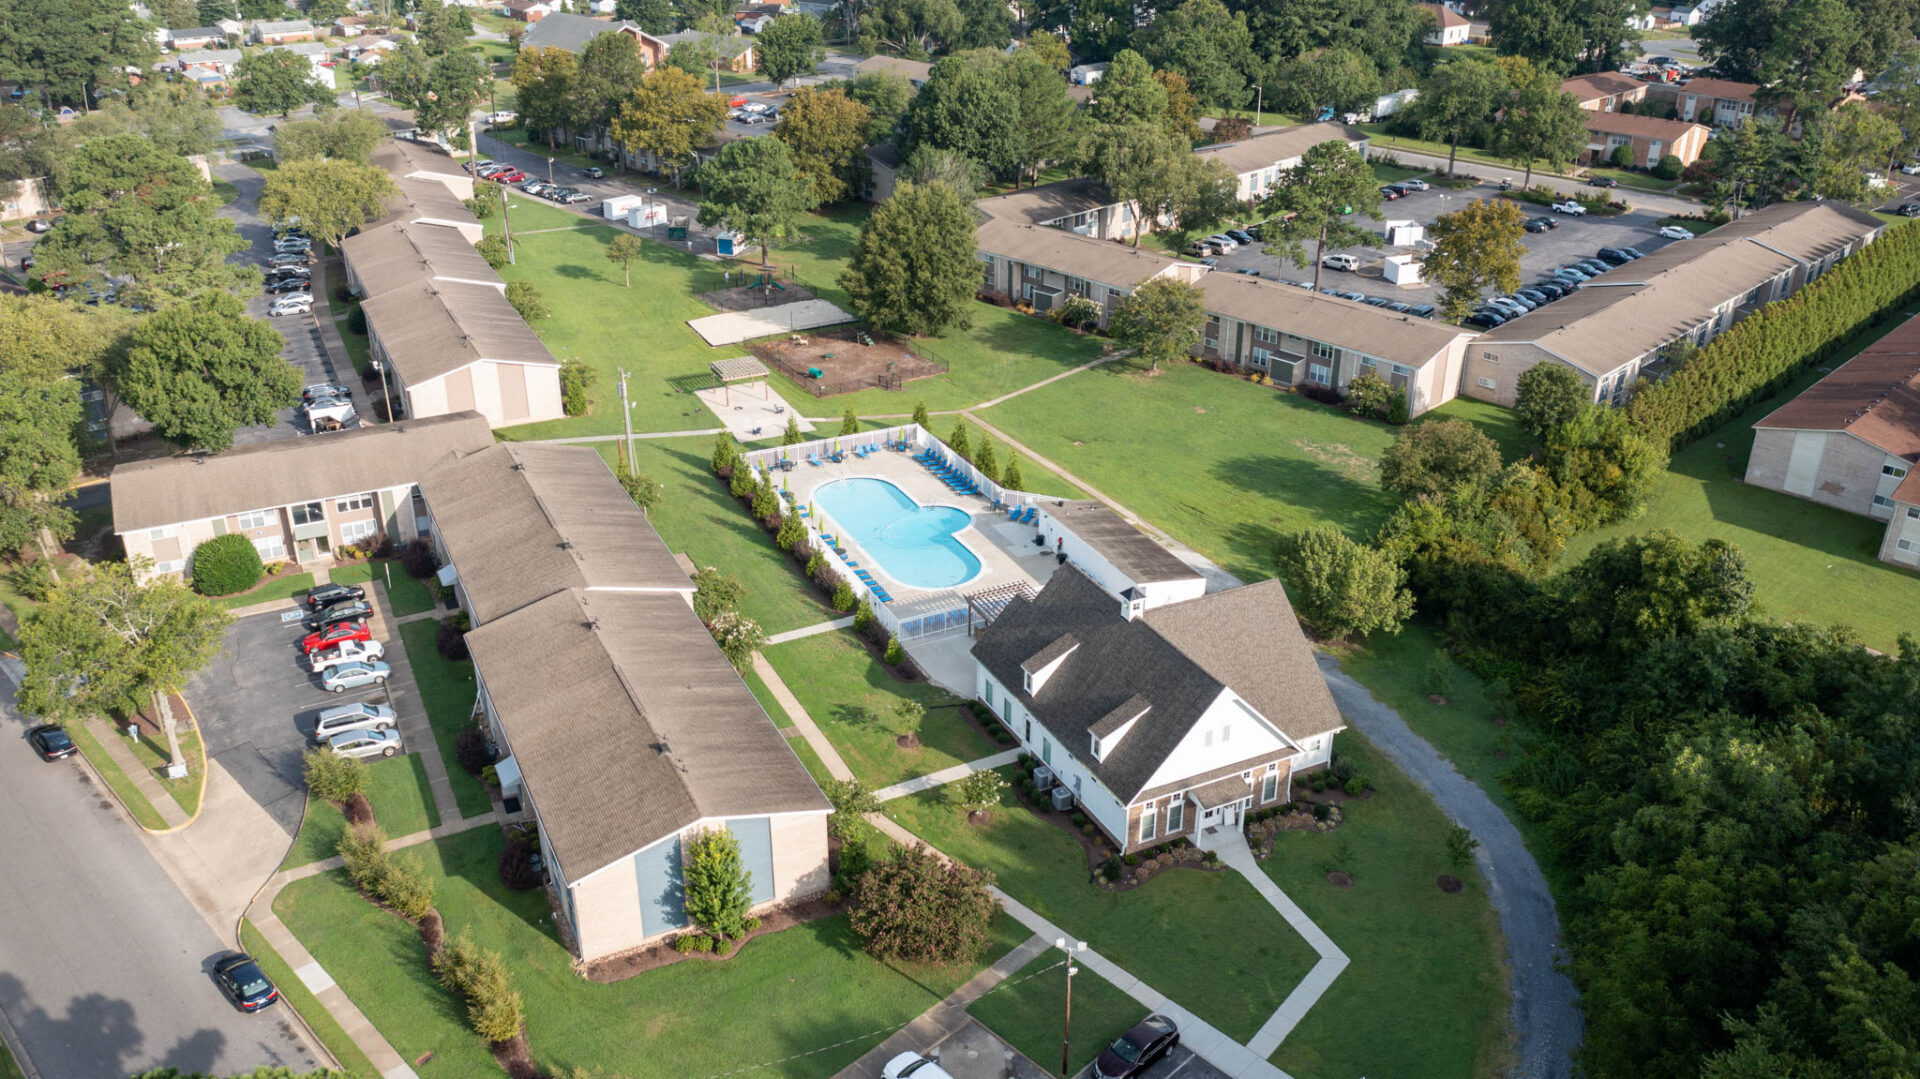 aerial view of entire complex including pool